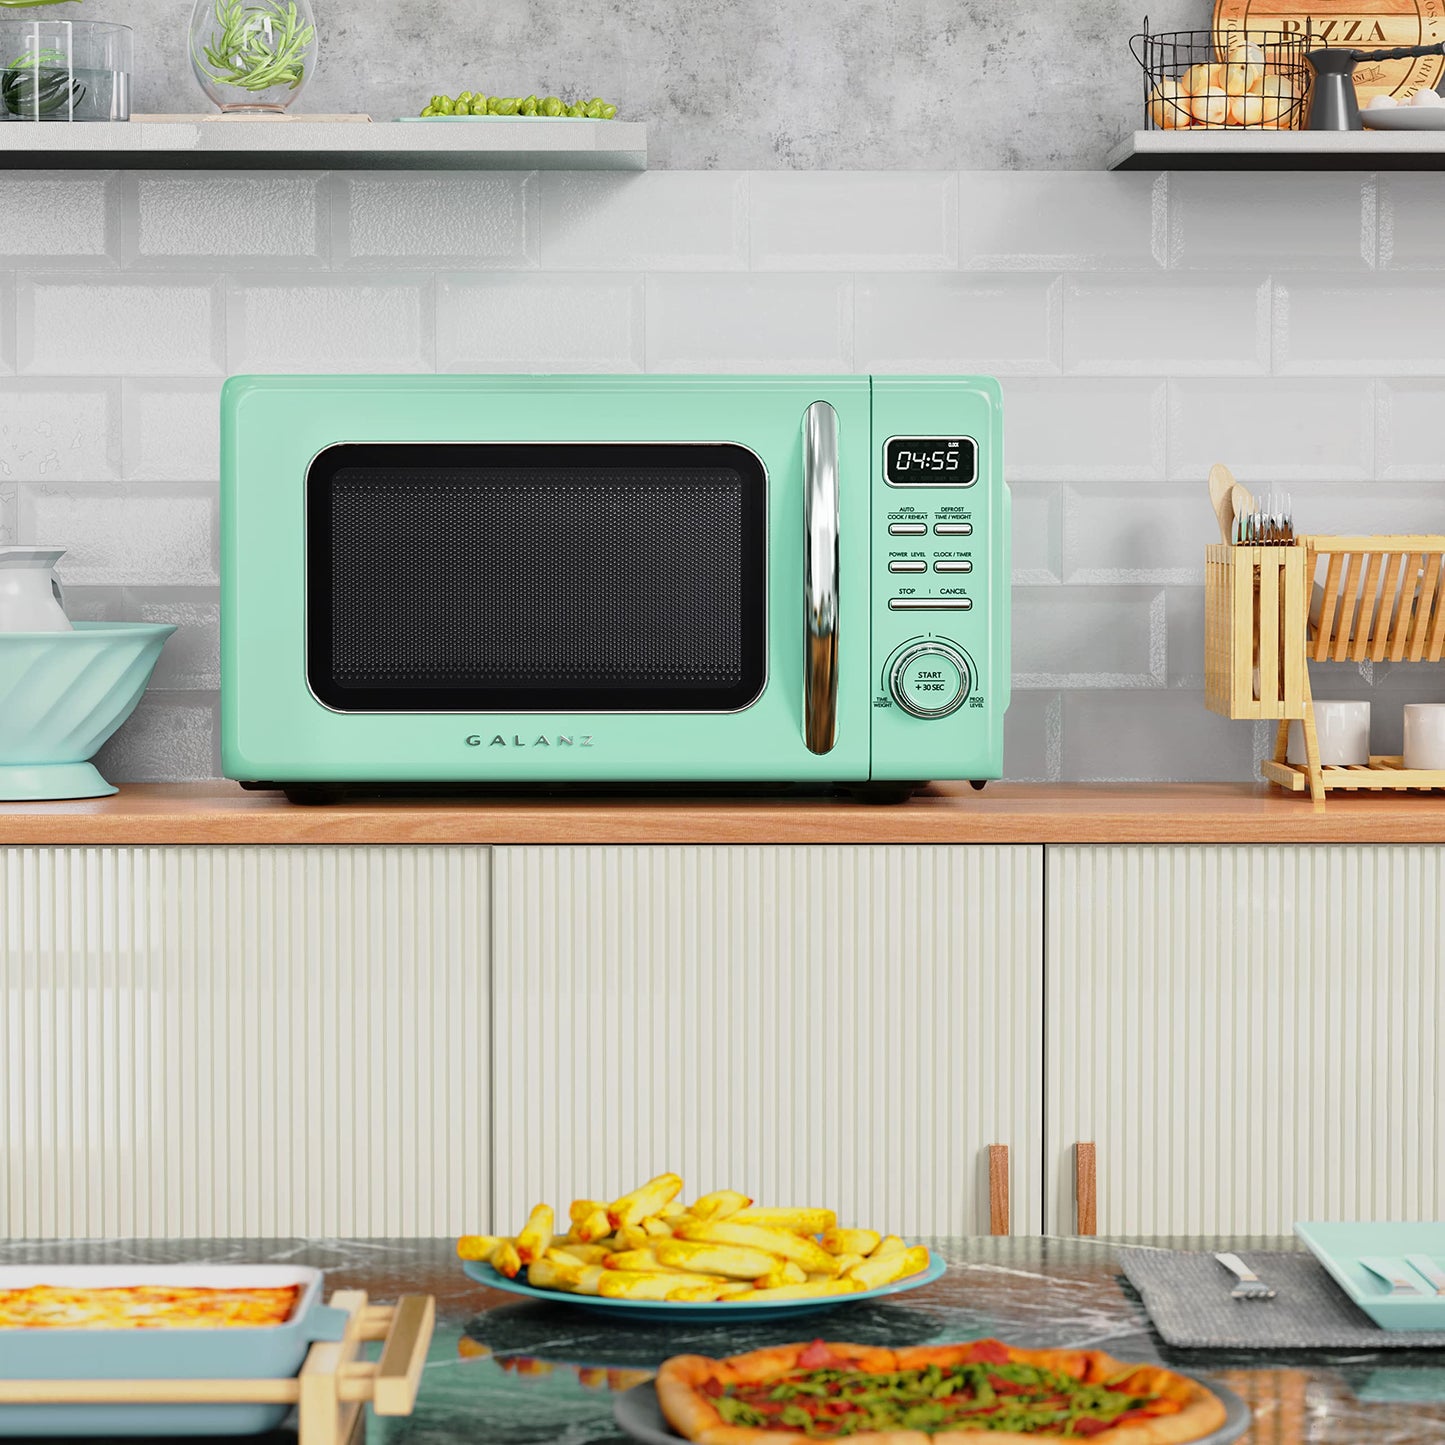 Galanz GLCMKZ11GNR10 Retro Countertop Microwave Oven with Auto Cook & Reheat, Defrost, Quick Start Functions, Easy Clean with Glass Turntable, Pull Handle, 1.1 cu ft, Green